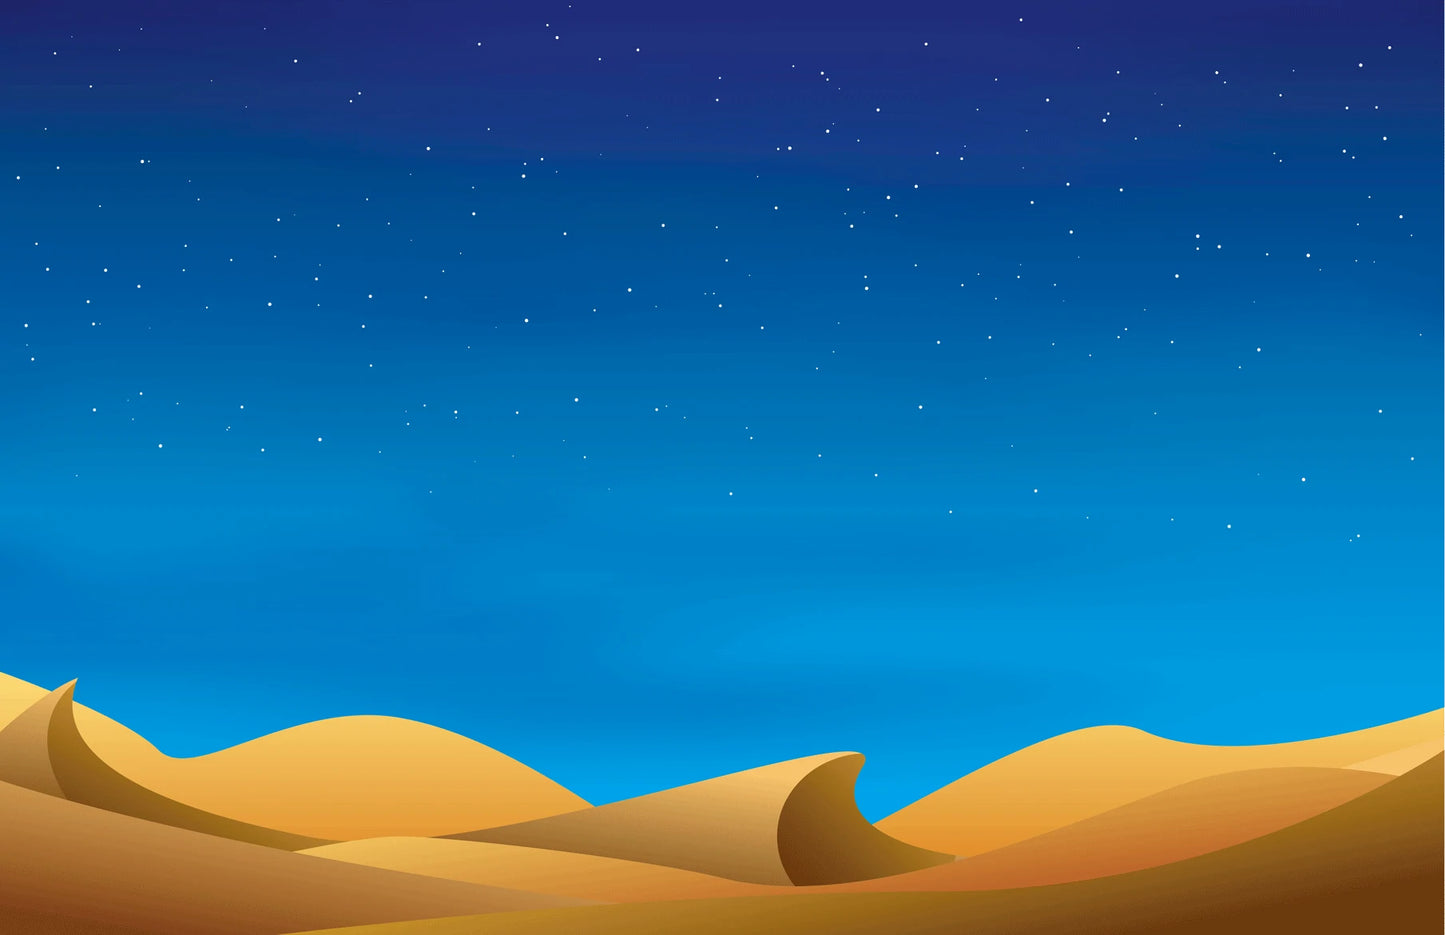 Wallpaper mural featuring a starry desert night for use in home decor